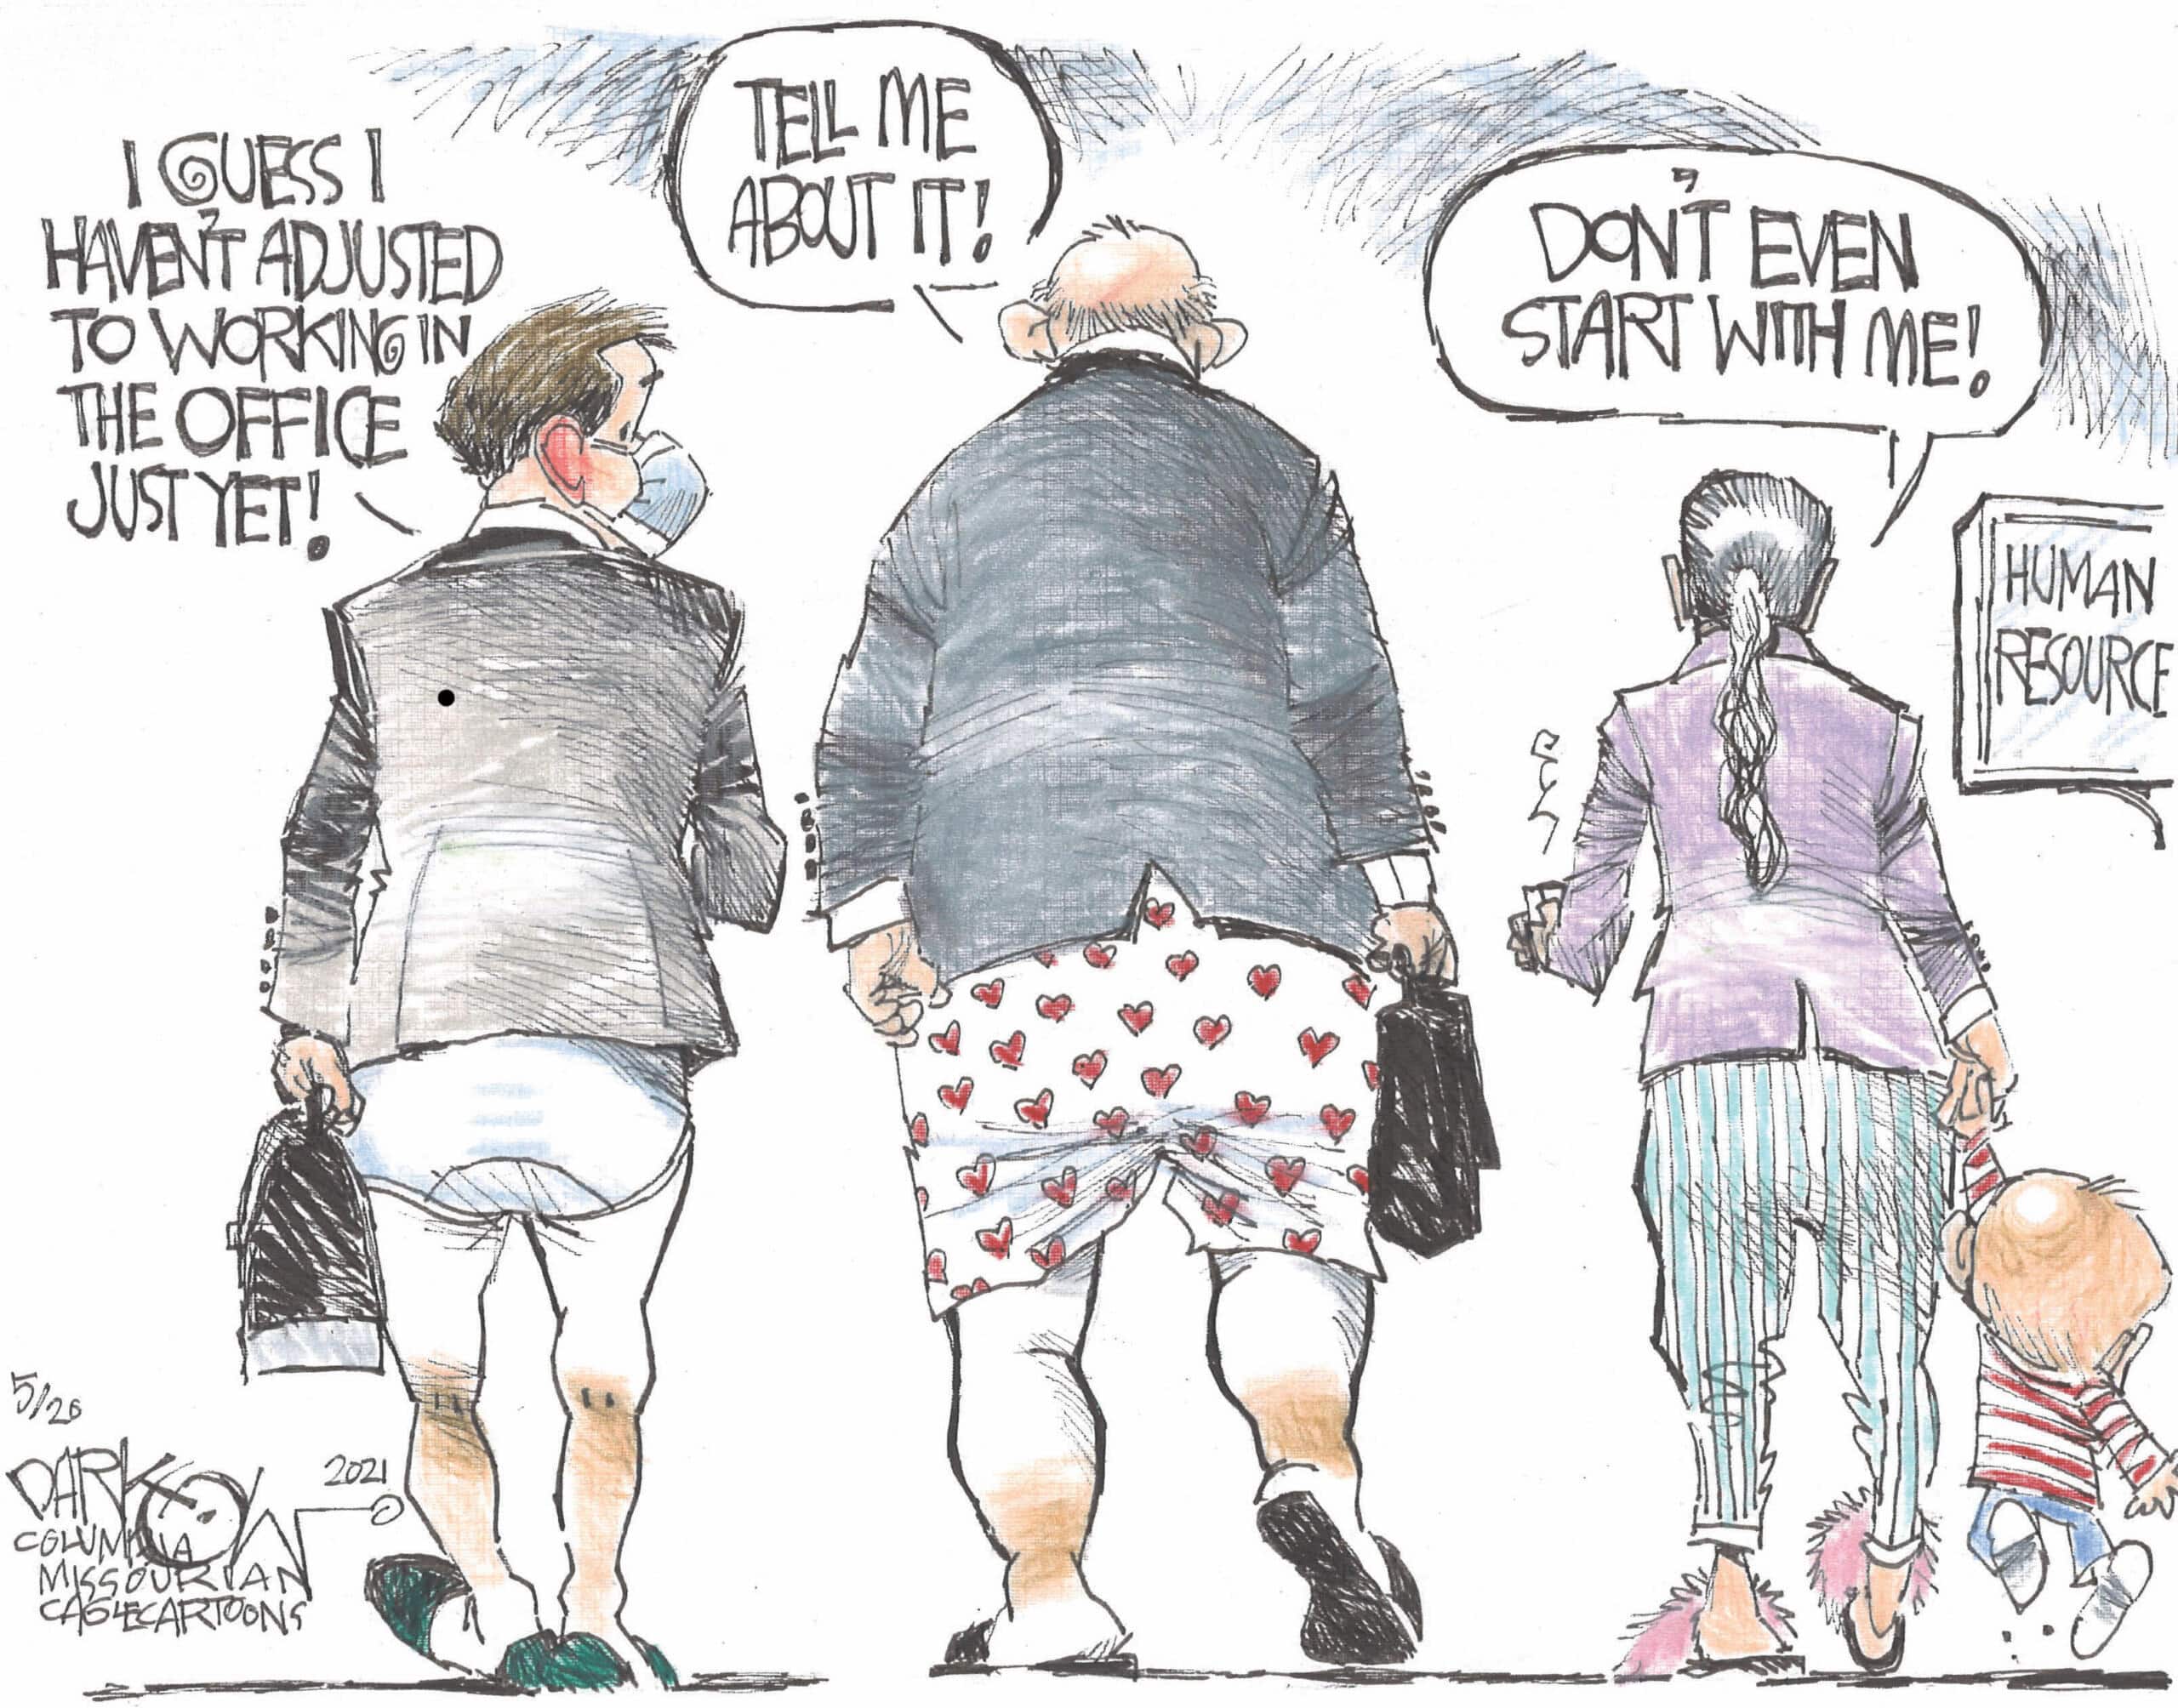 cartoon of two men a woman walking to work wearing jackets but only their underwear because they have become so accustomed to working from home